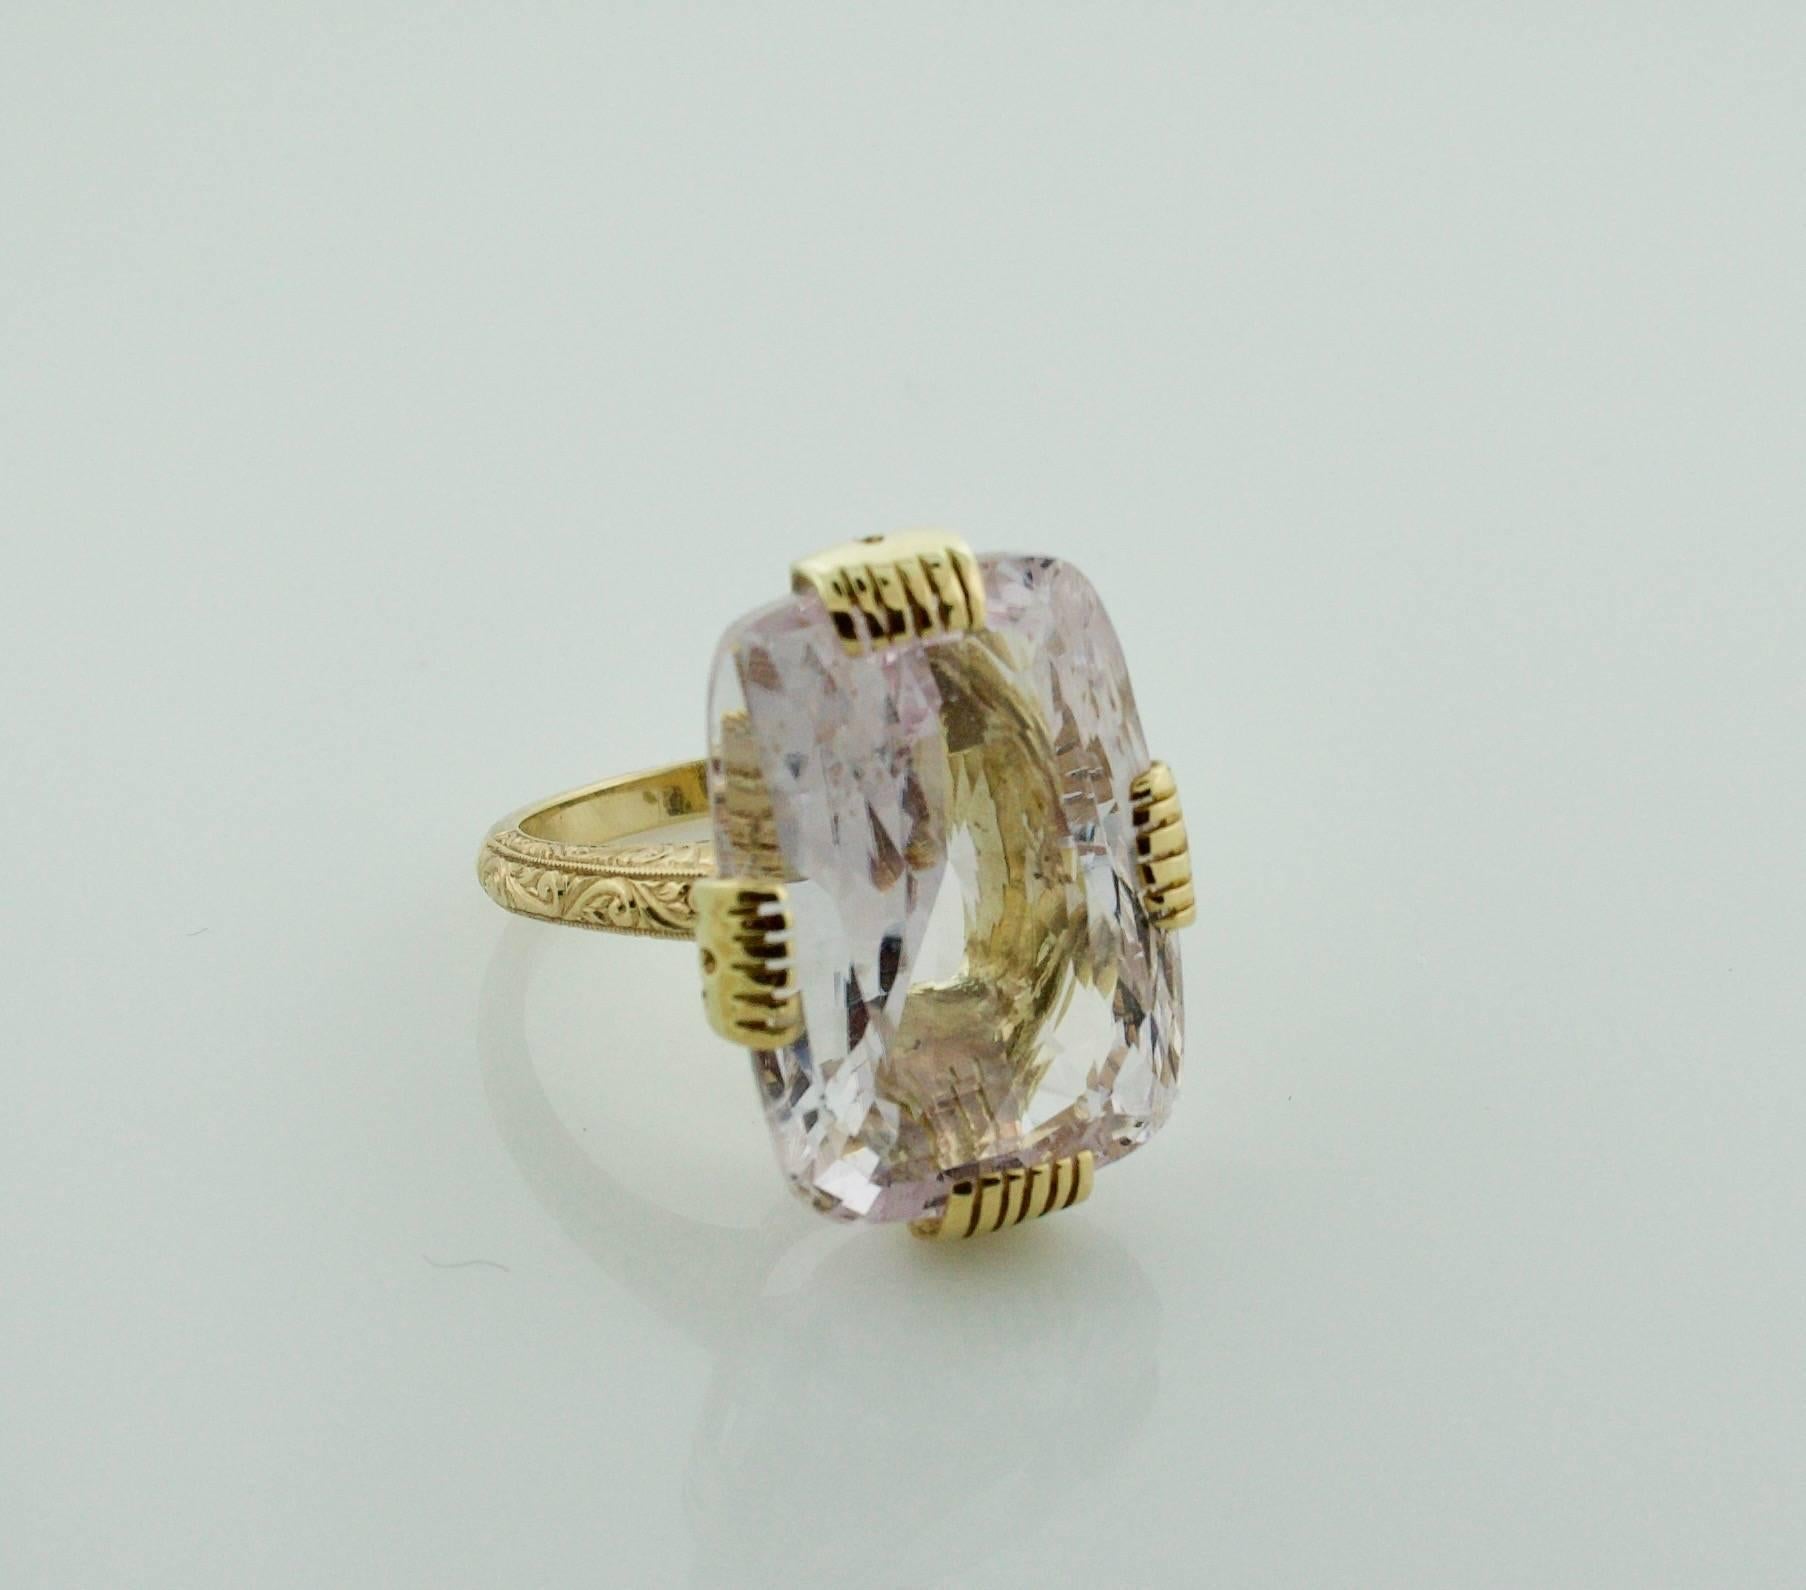 35.90 carat Pink Sapphire Ring in 18k Yellow Gold
Set in a Custom Made Engraved Ring
Stunning would be a Gross Understatement 